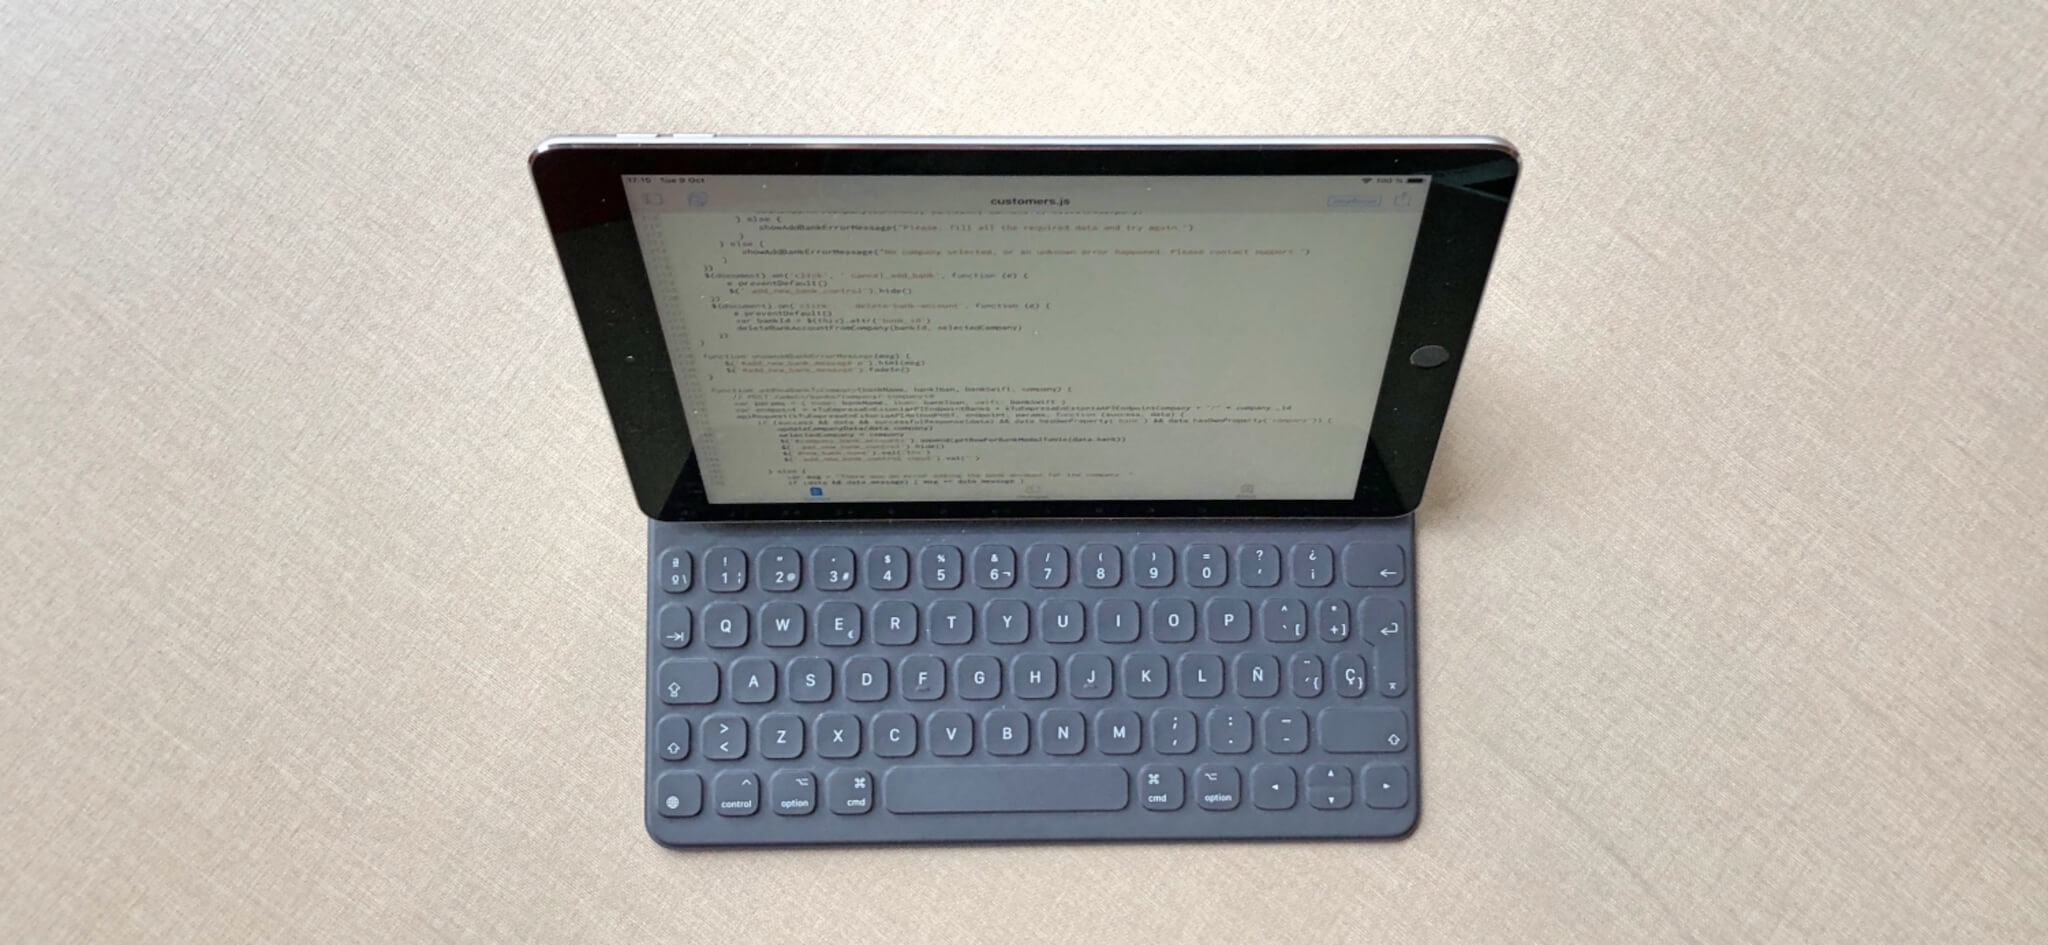 One Week With The iPad Pro As My Only Working Device